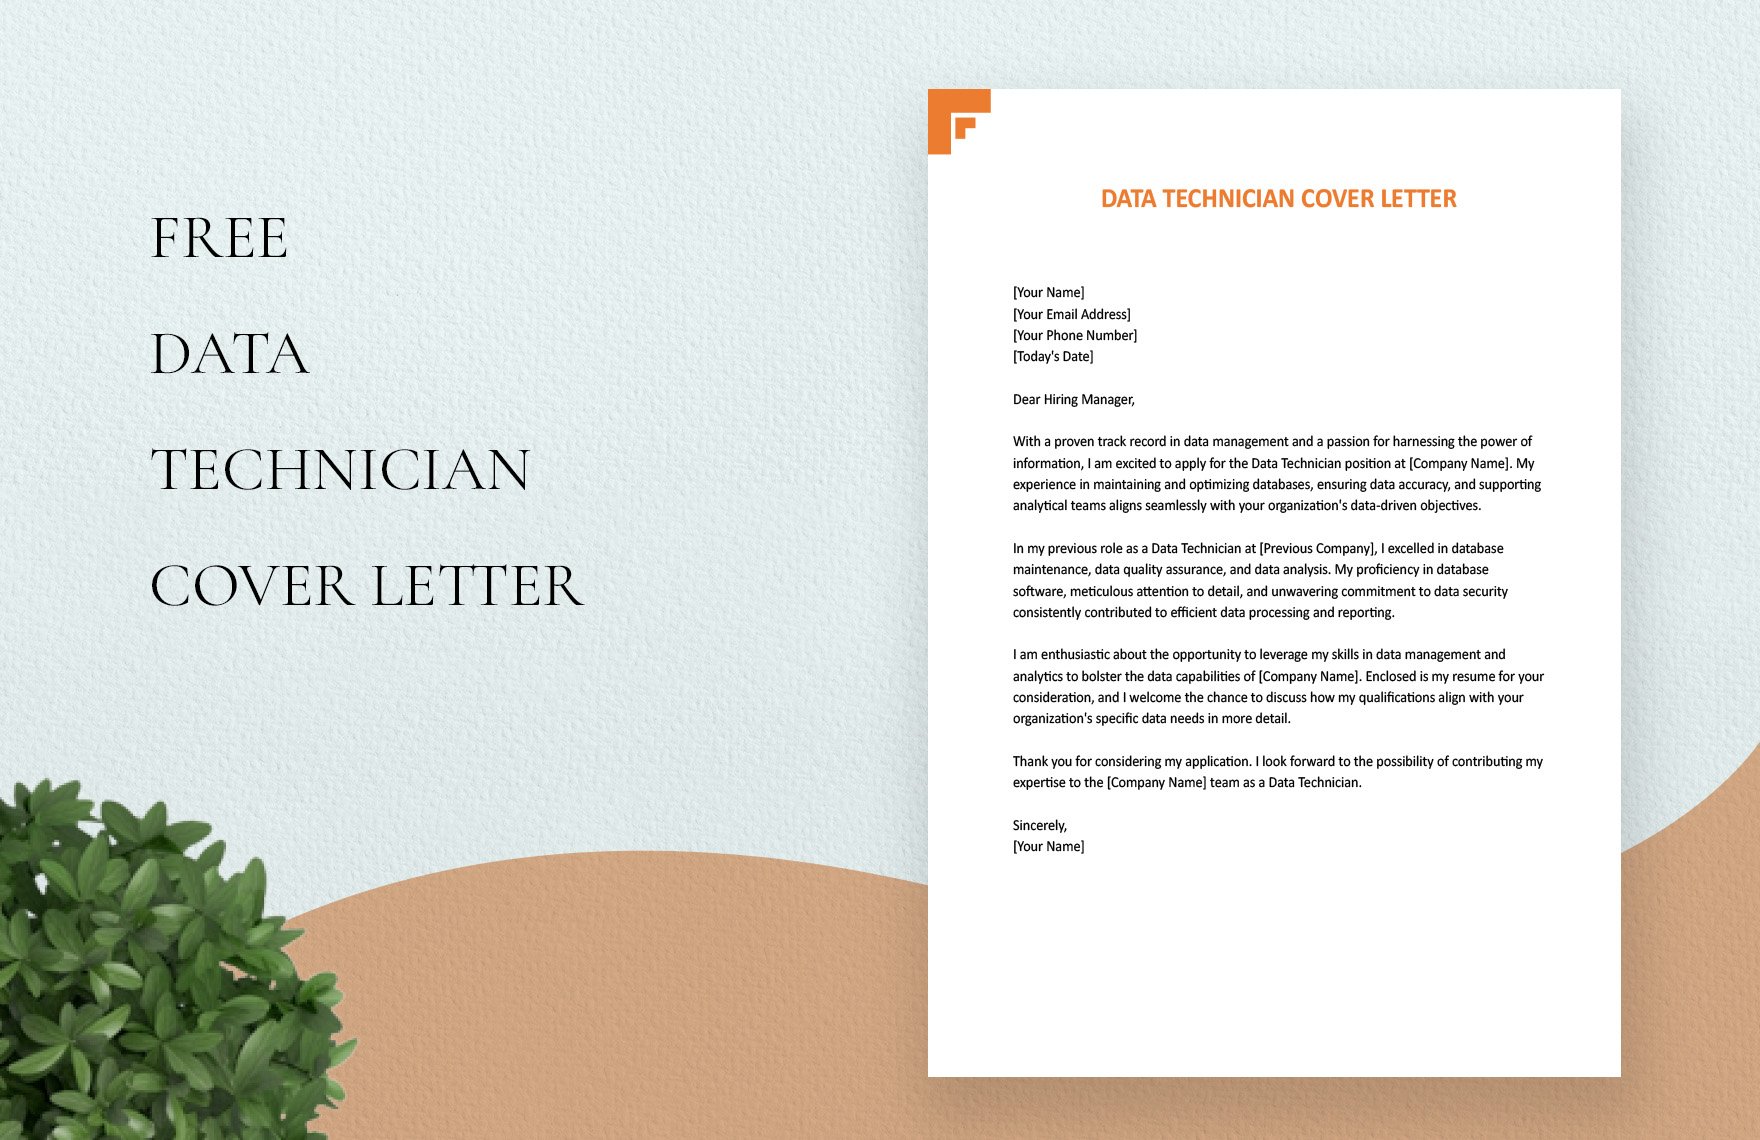 Data Technician Cover Letter in Word, Google Docs